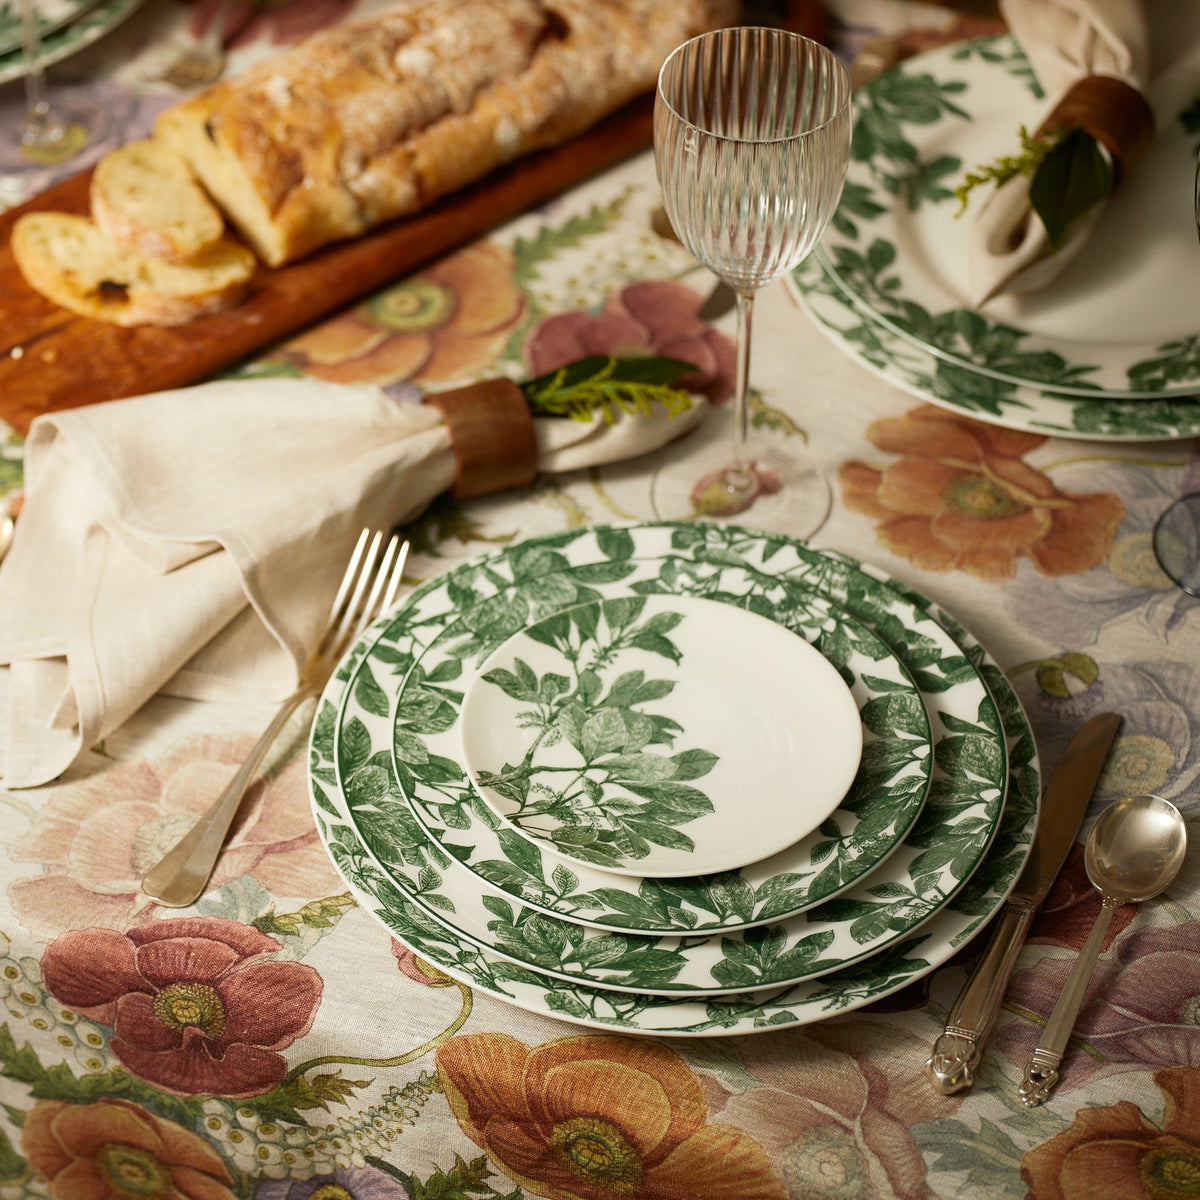 A table is set with green and white floral-patterned **Arbor Green Rimmed Dinner Plates** by **Caskata**, a wine glass, cutlery, and a cloth napkin. A bread loaf on a wooden board and a floral tablecloth are also visible.